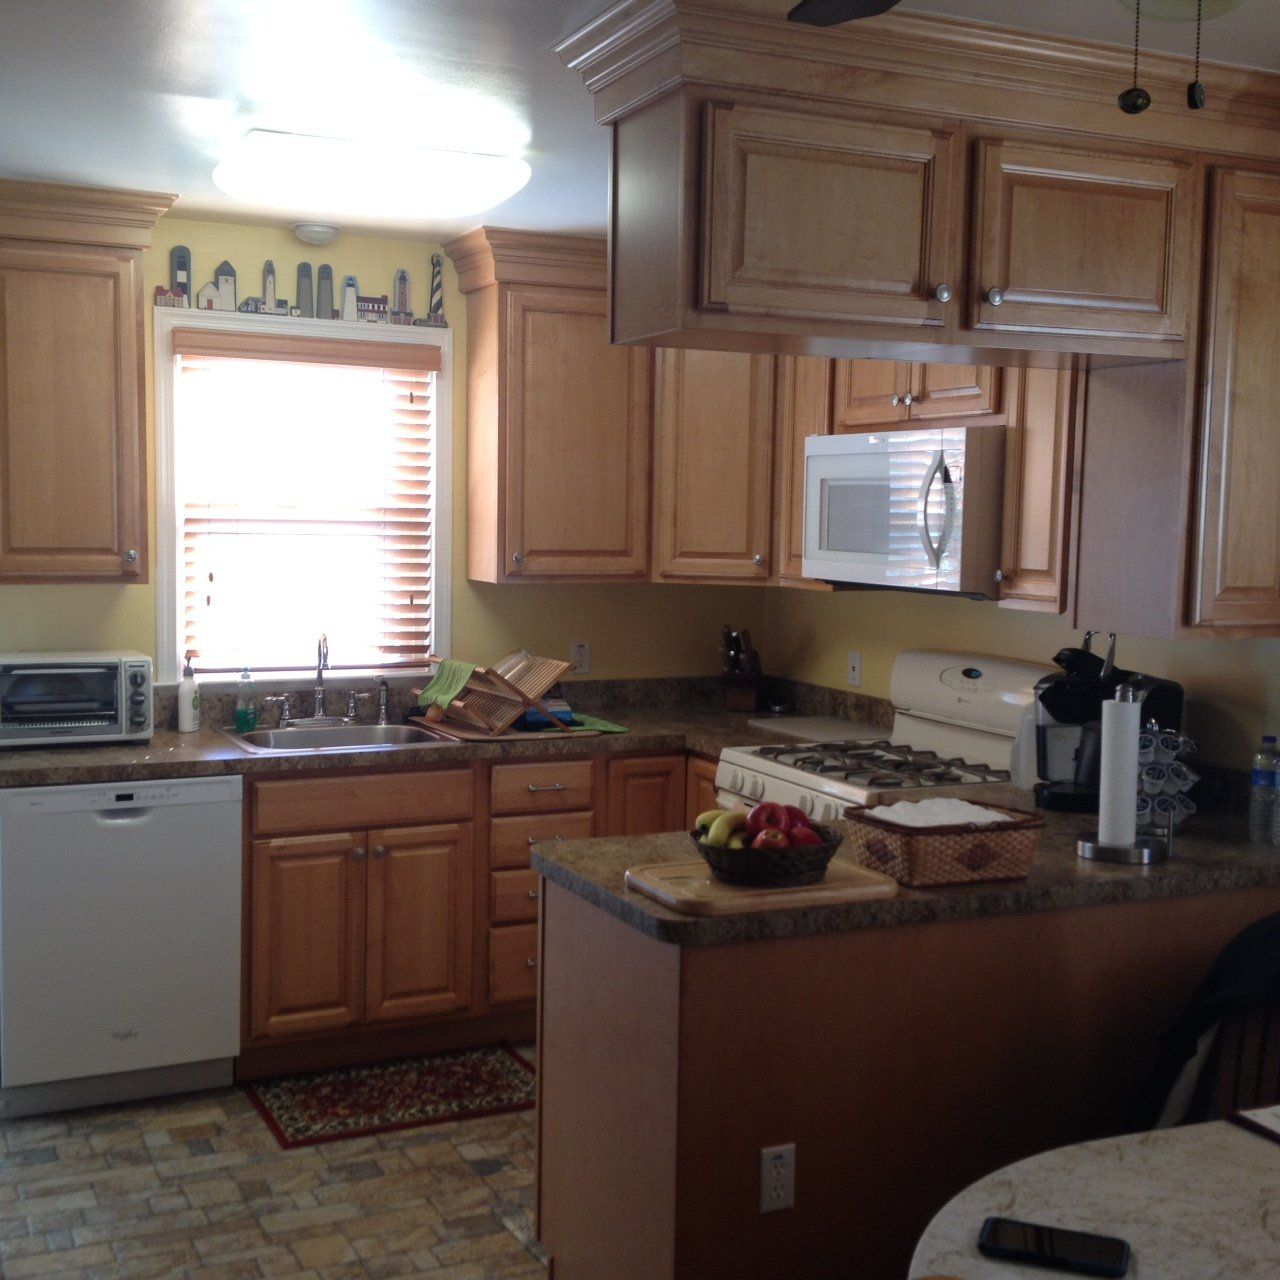 Kitchen 01 - Construction Services in Long Green Rd, Glen Arm MD